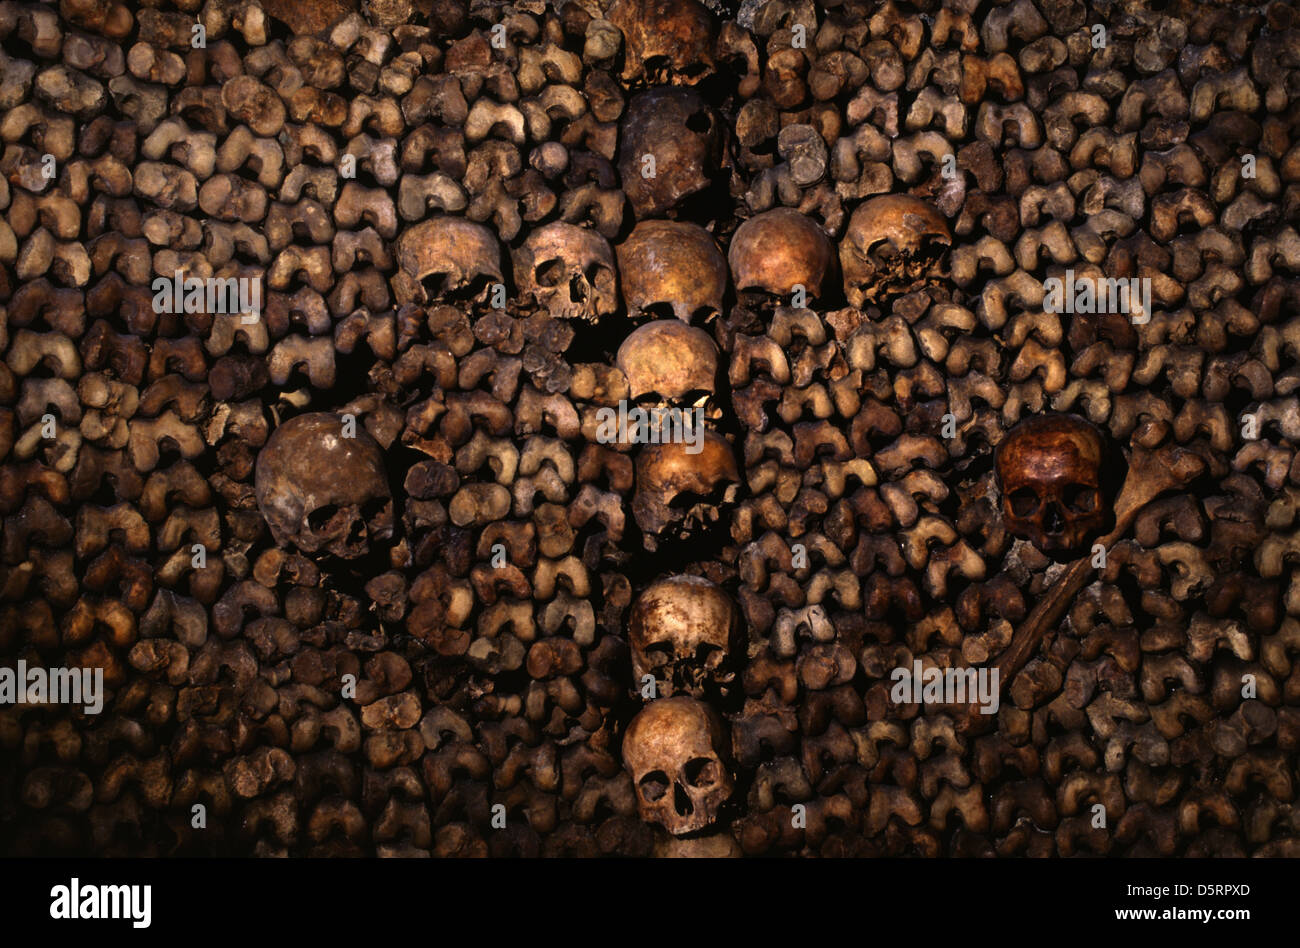 Wall made of skulls at the Catacombs of Paris an underground ossuaries which hold the remains of slightly less than 2 million people in a small part of a tunnel network built to consolidate Paris' ancient stone mines Extending south from the Barrière d'Enfer ("Gate of Hell") former city gate in Paris France Stock Photo